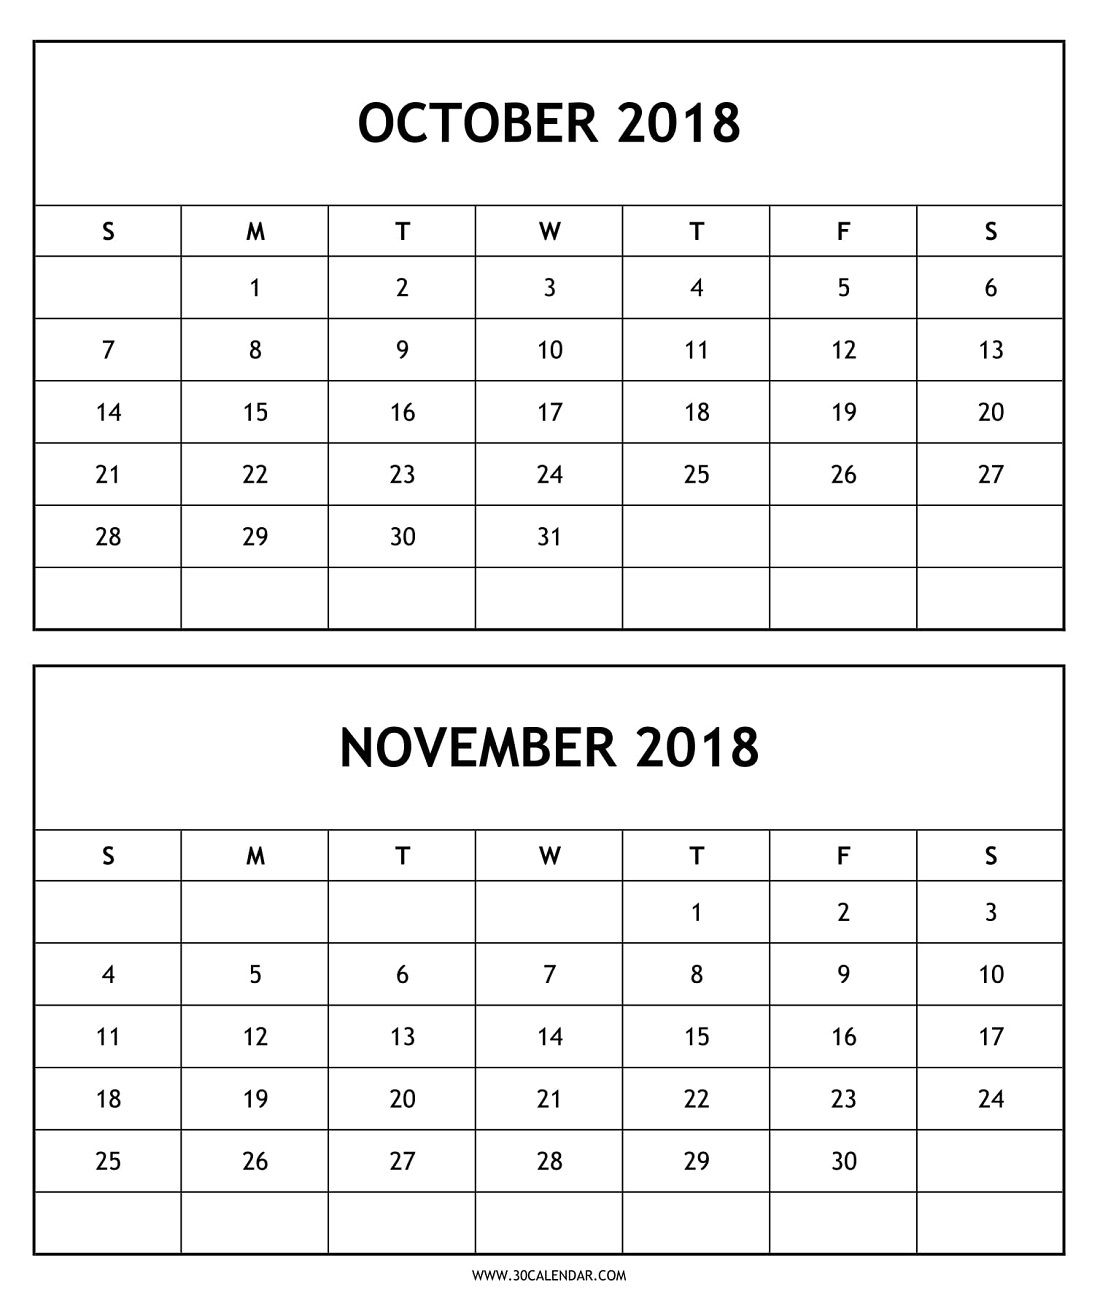 Blank Two Month Calendar 2018 October November To Print in Blank 2 Month Calendar